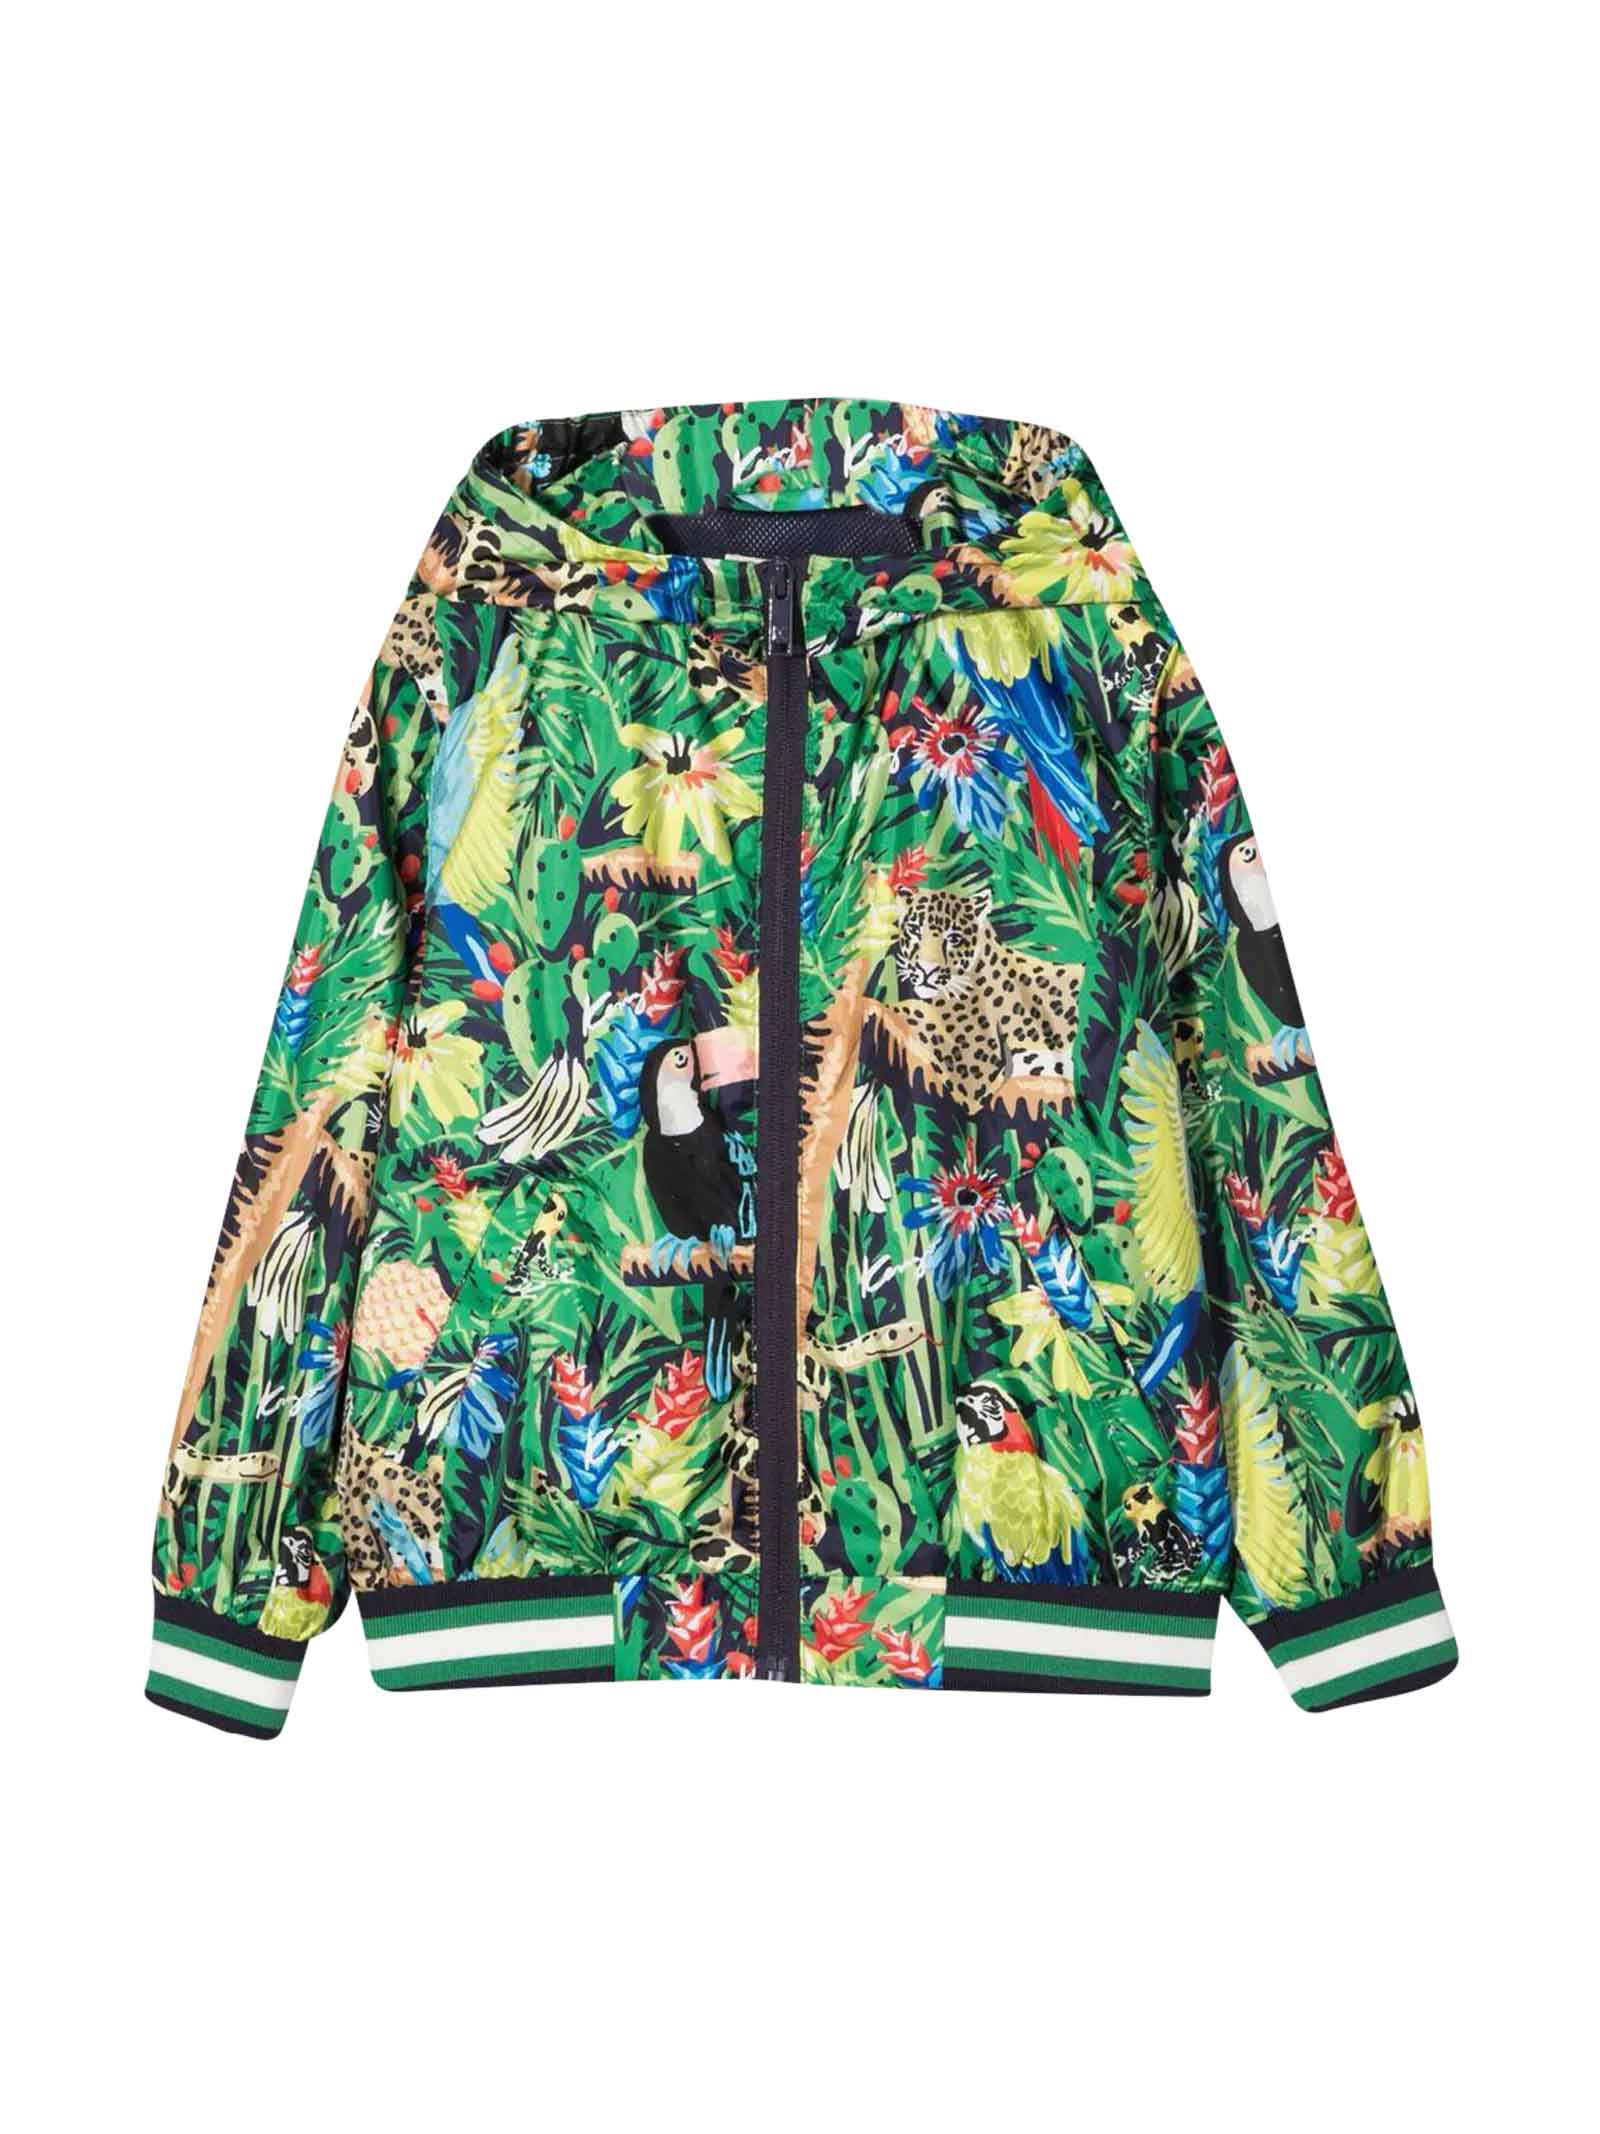 Kenzo Kids Unisex Multicolor Windproof Jacket With All-over Botanical Print With Striped Edges, Classic Hood, Front Zip Closure, Long Sleeves, Ribbed Cuffs, Ribb